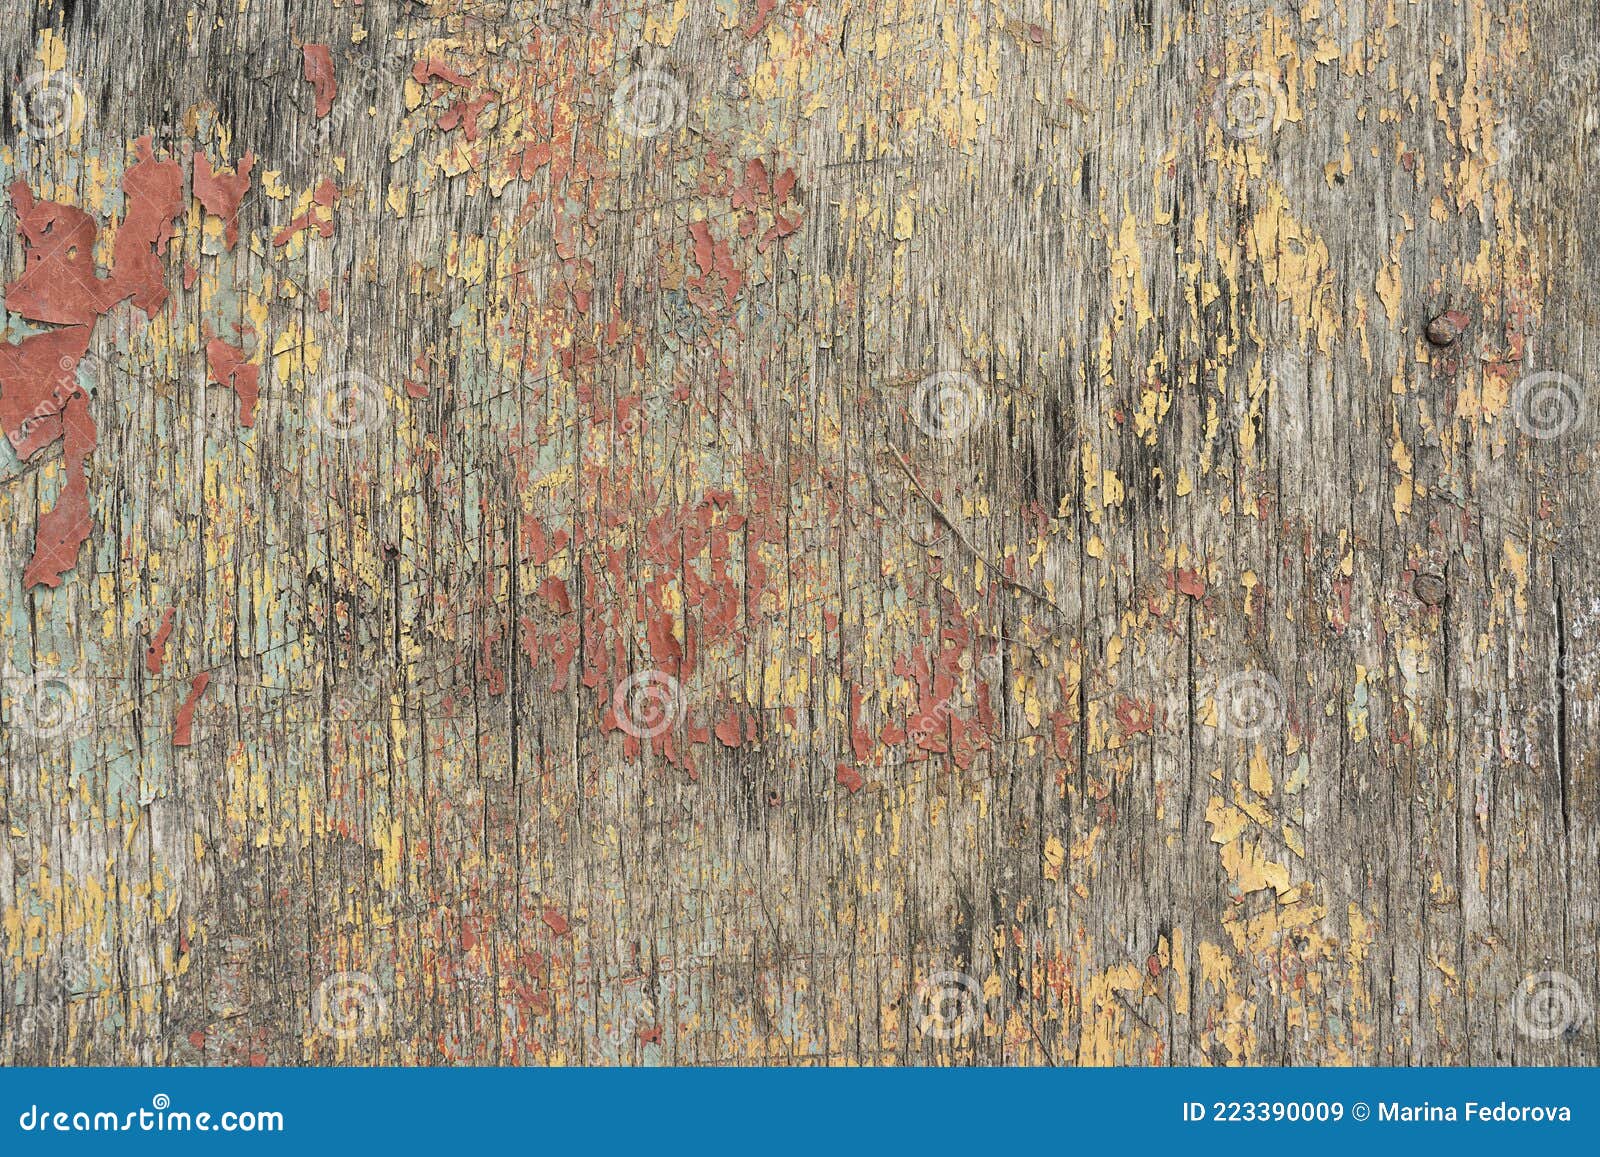 White painted wood texture seamless rusty grunge background